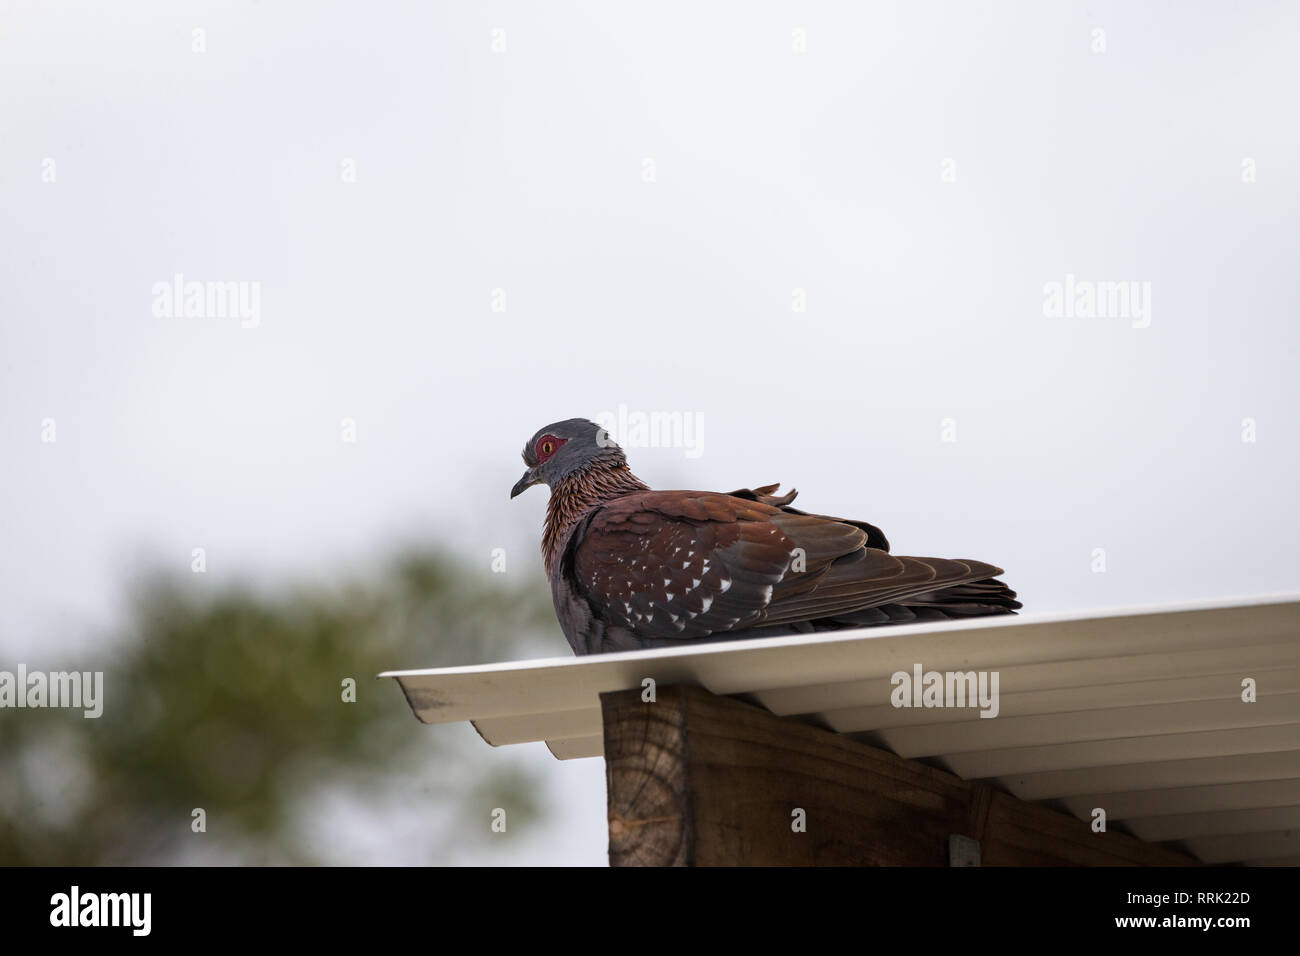 Speckled Pigeon (Columba guinea) or African rock pigeon bird perched on the top of a roof against a cloudy sky, West Coast, South Africa Stock Photo